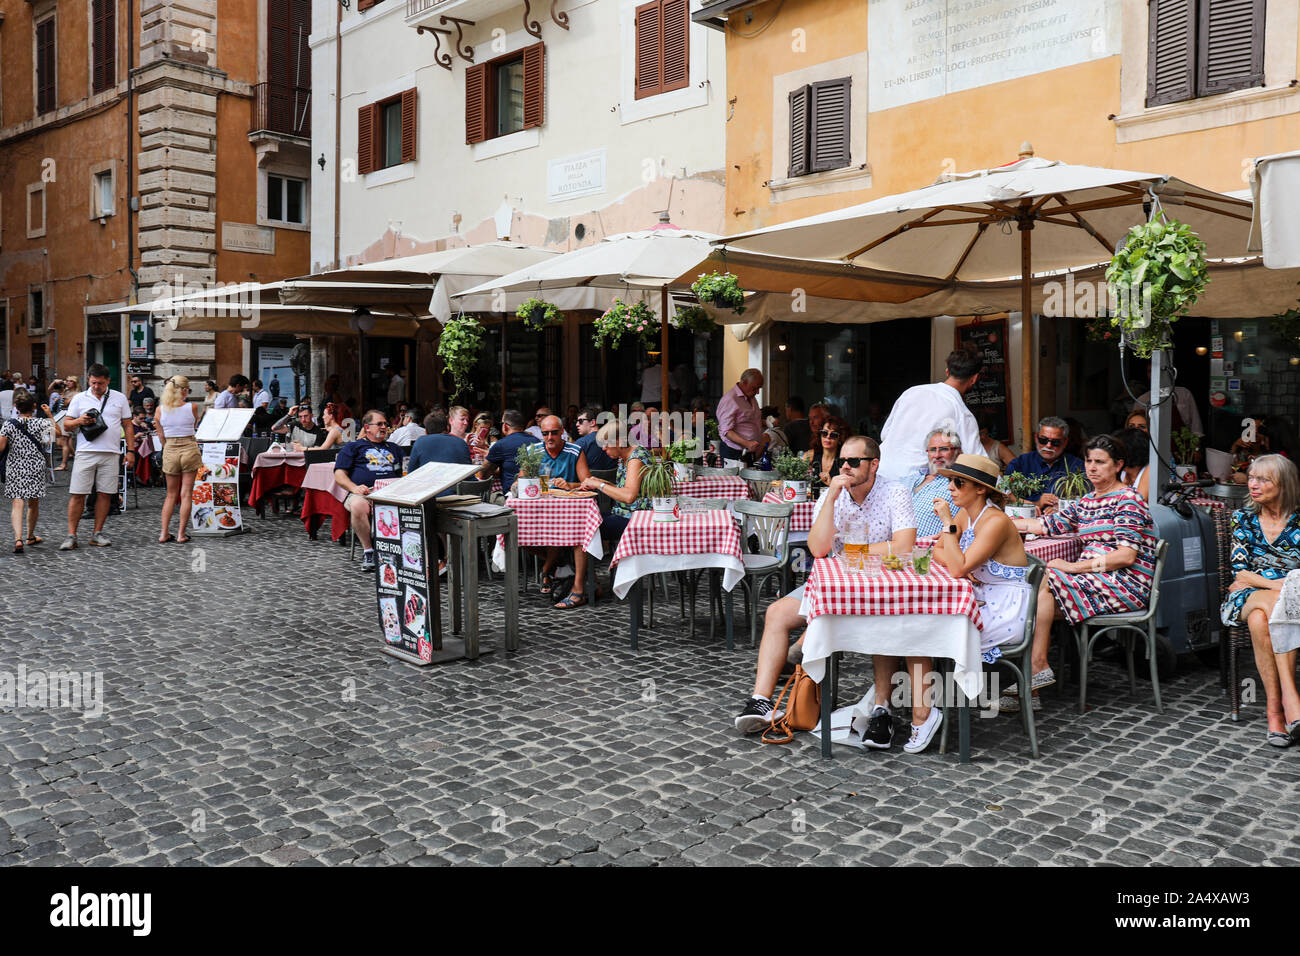 Tourists having a drink at outdoor cafe bar restaurant in the Piazza della Rotonda in Rome, Italy Stock Photo